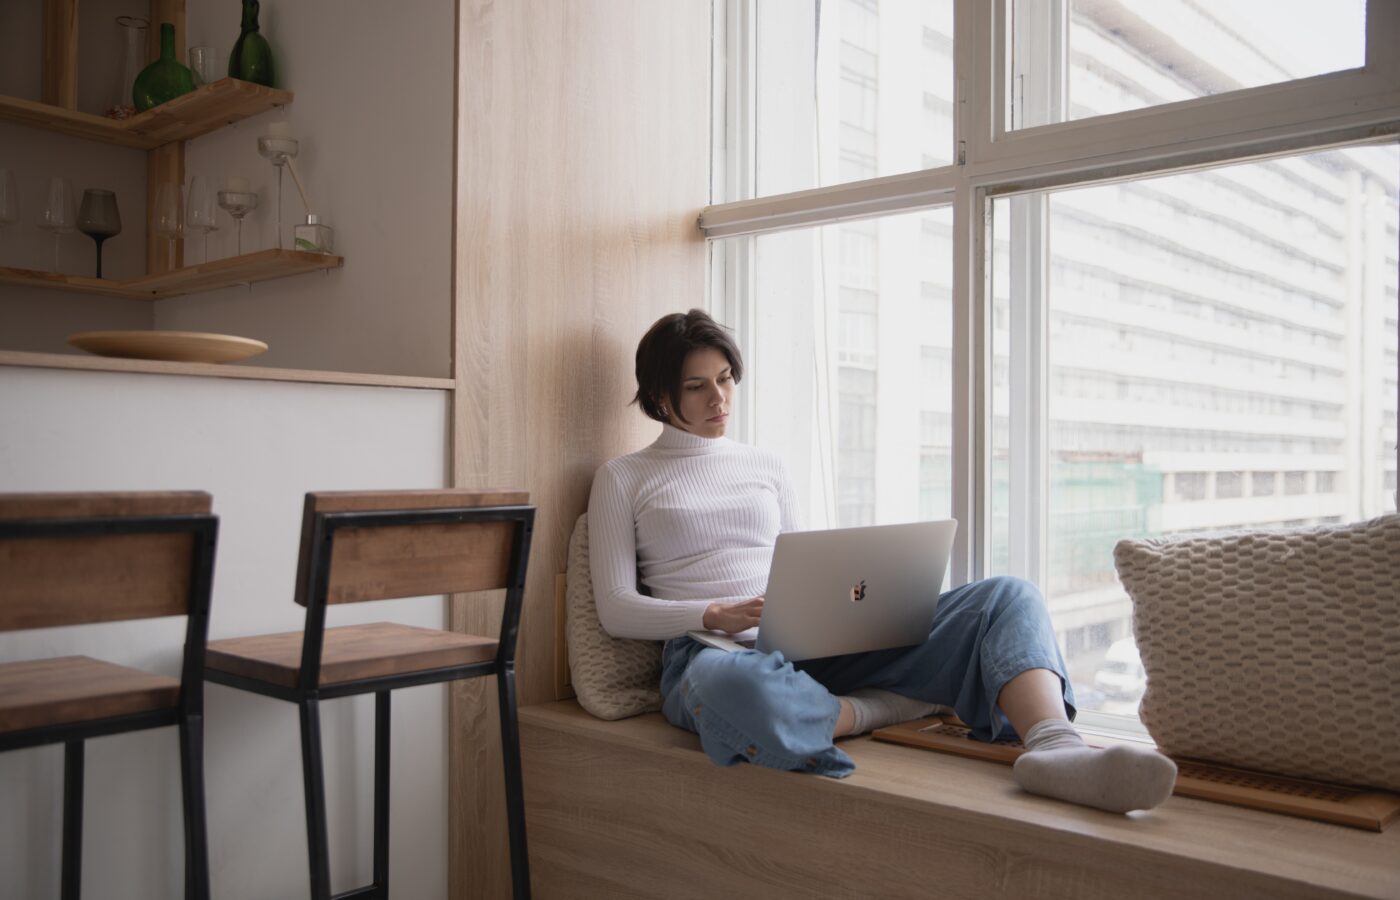 use of home as office for e-commerce entrepreneurs - woman with white top and jeans sitting in a window seat working on a laptop